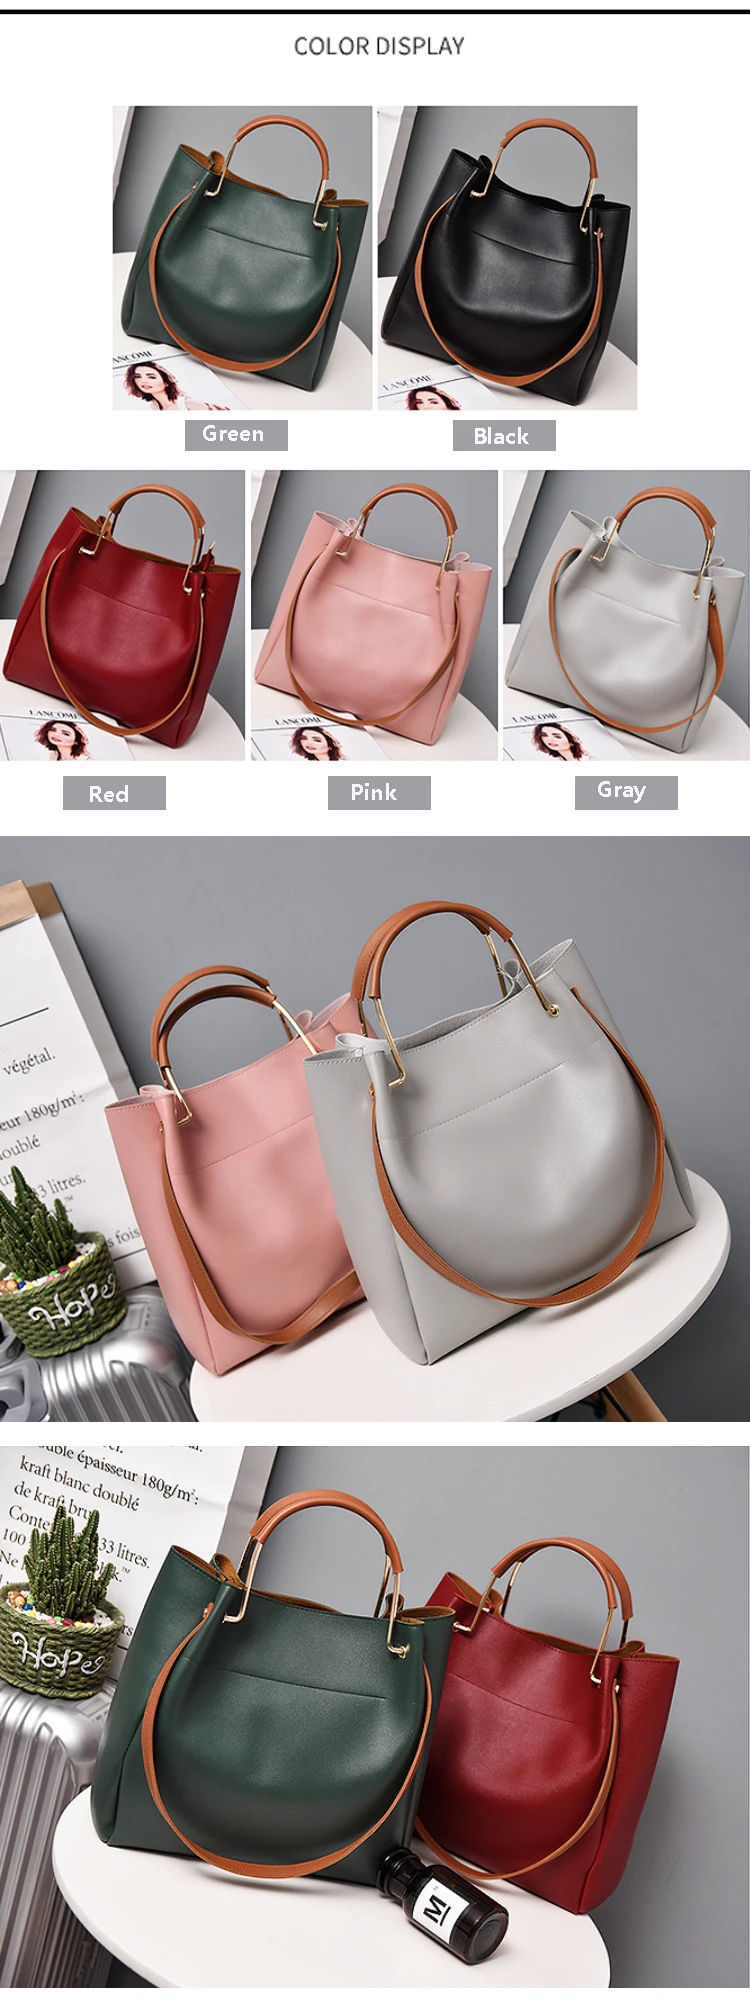 Osgoodway2 High Quality Young Ladies Handbags Stock PU Leather Bags Women Handbags Black